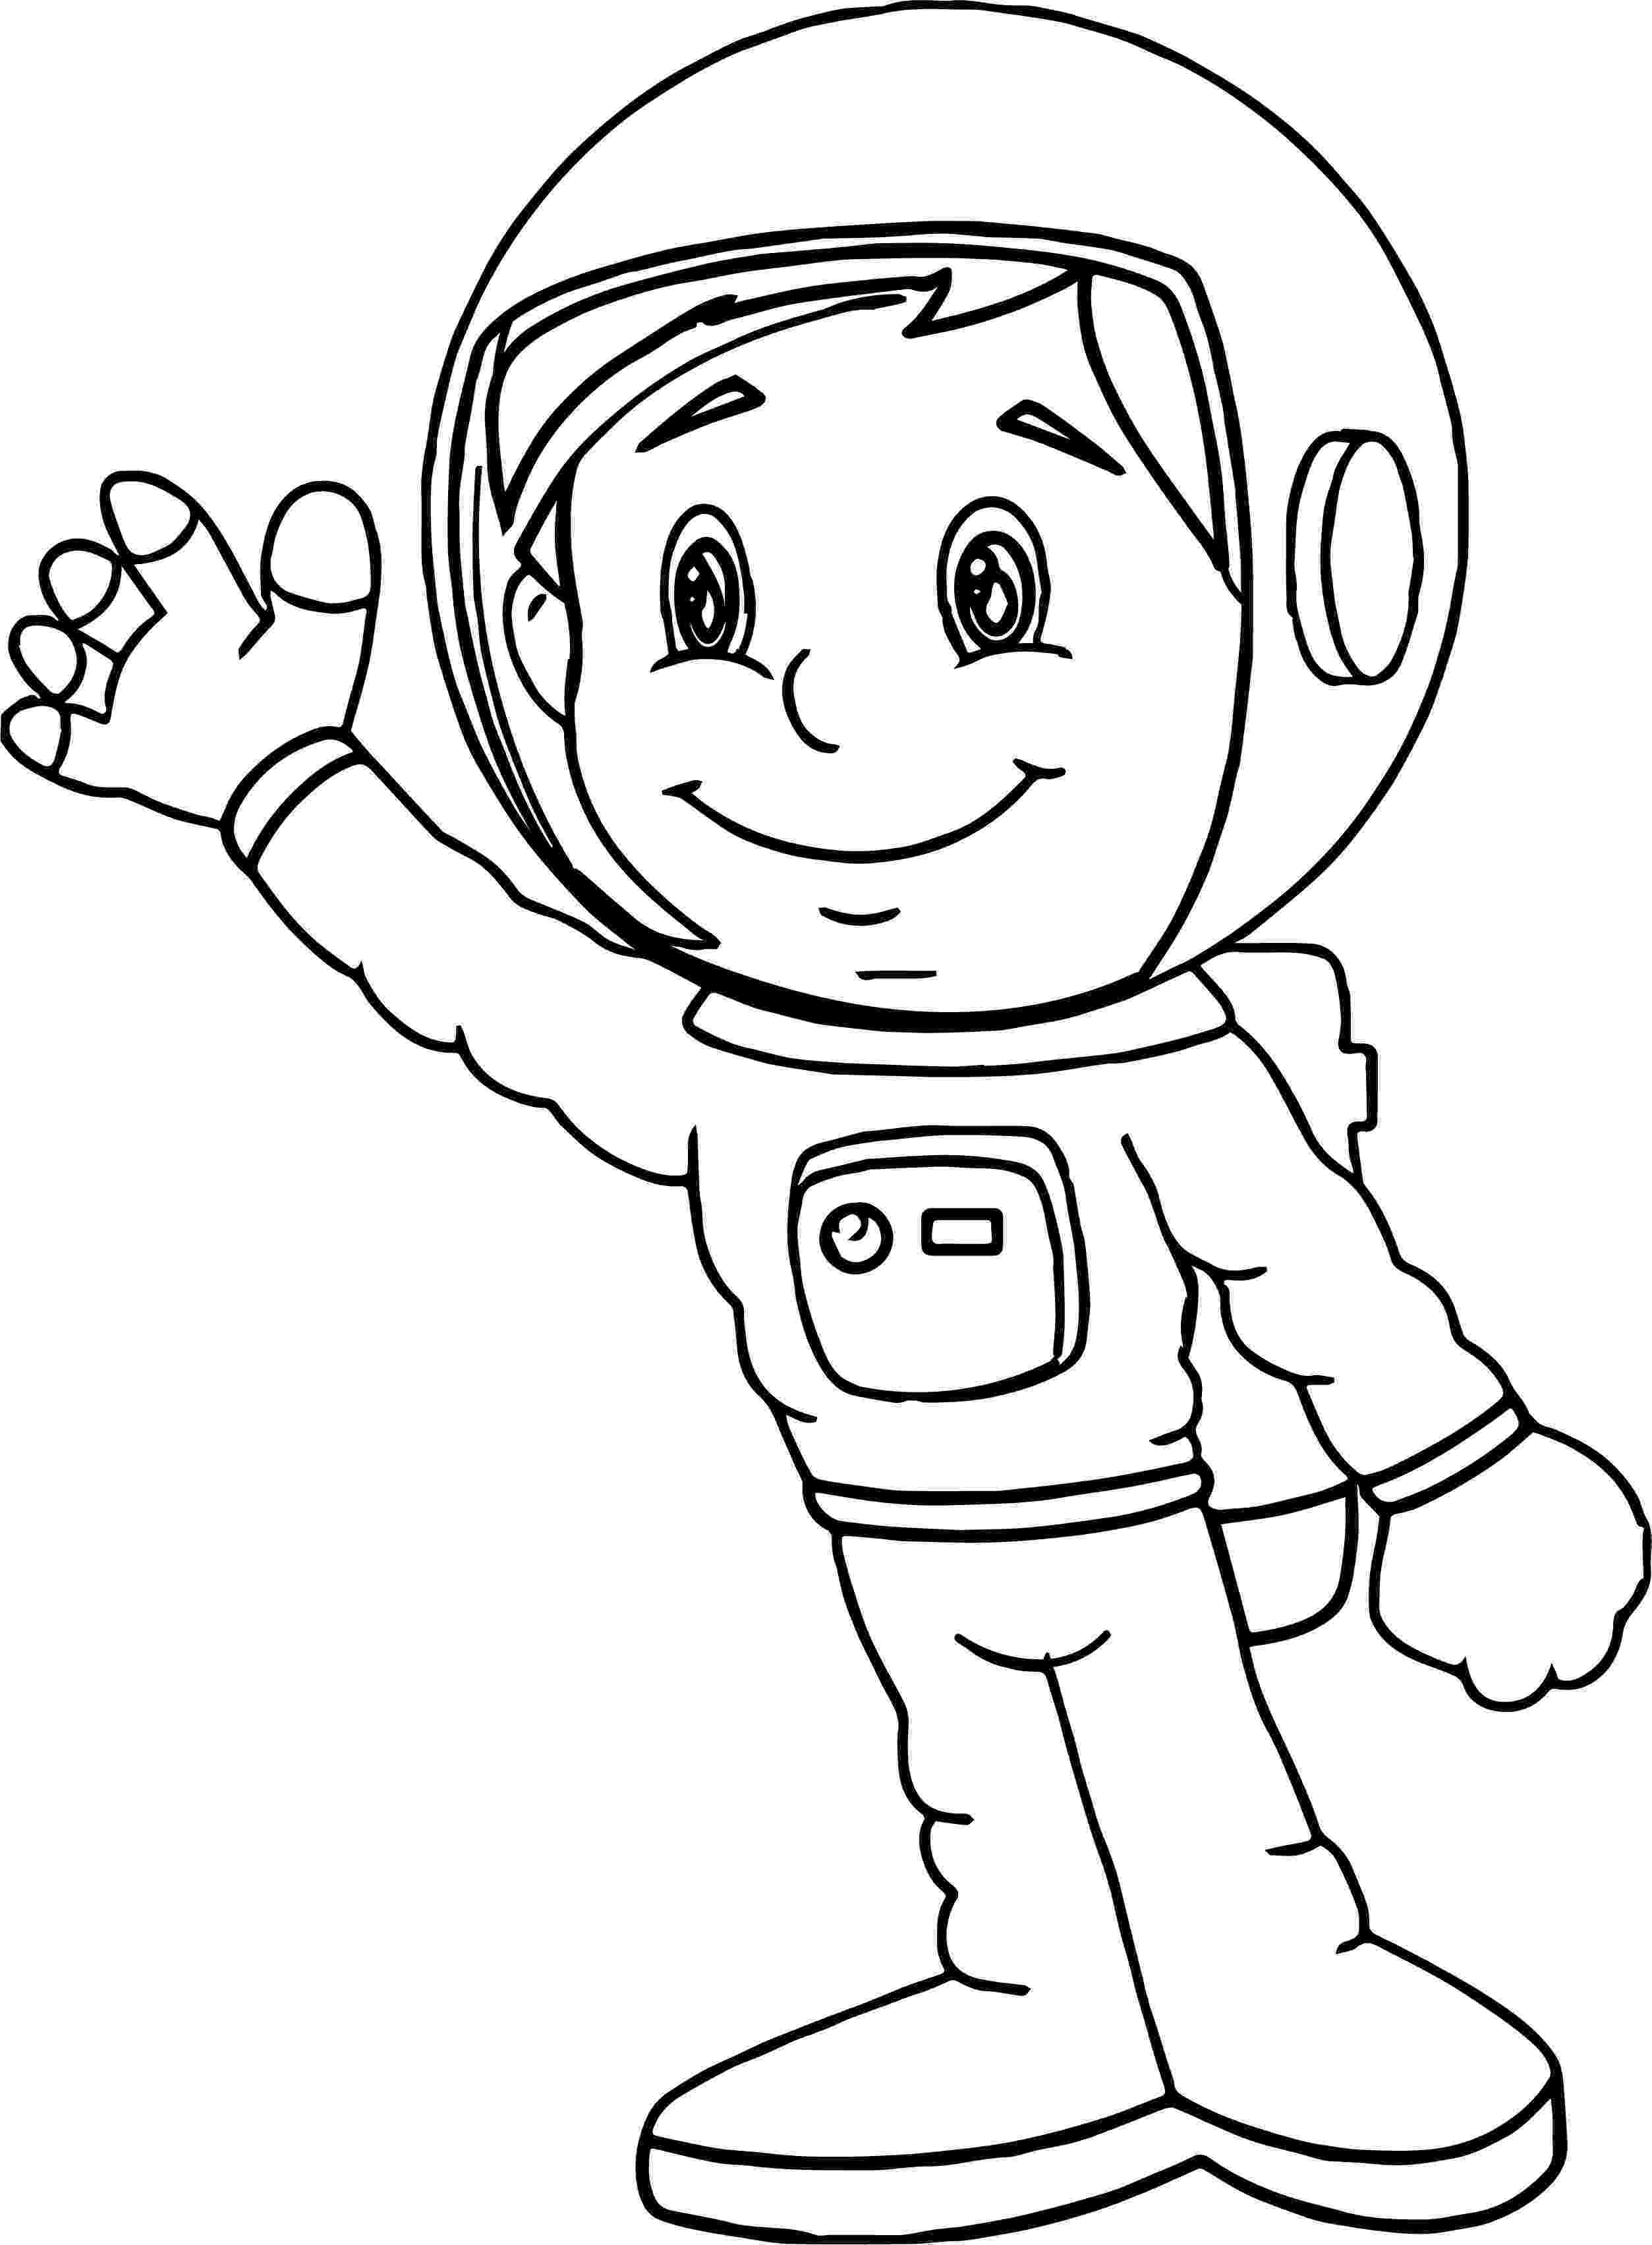 coloring pages of astronauts astronaut colouring pages realistic coloring pages coloring pages astronauts of 